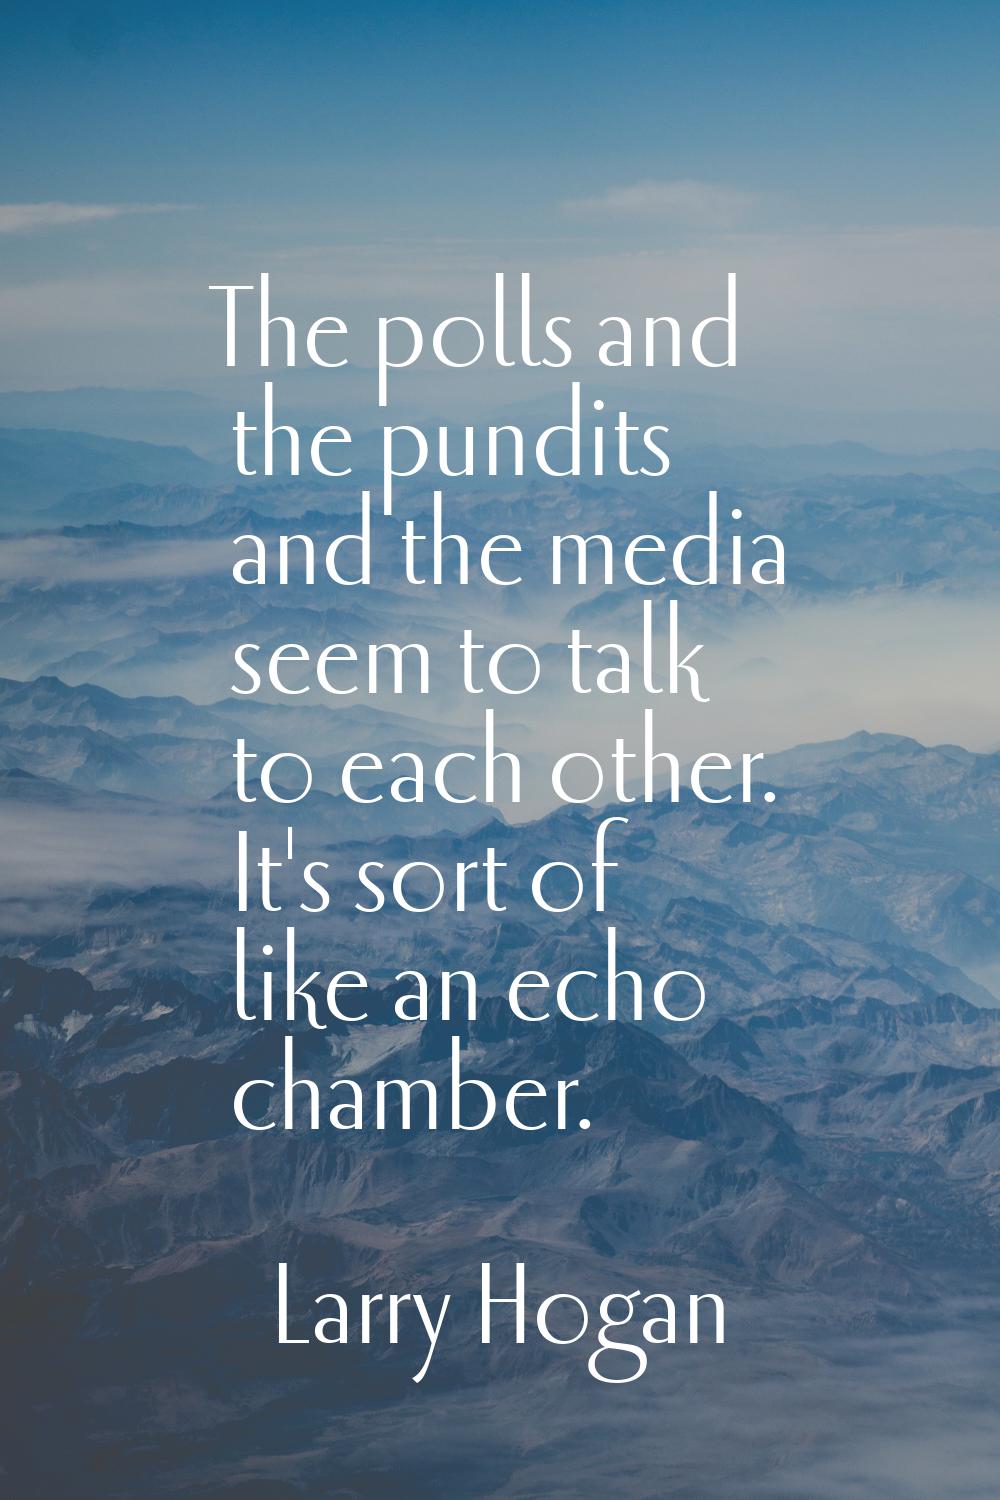 The polls and the pundits and the media seem to talk to each other. It's sort of like an echo chamb